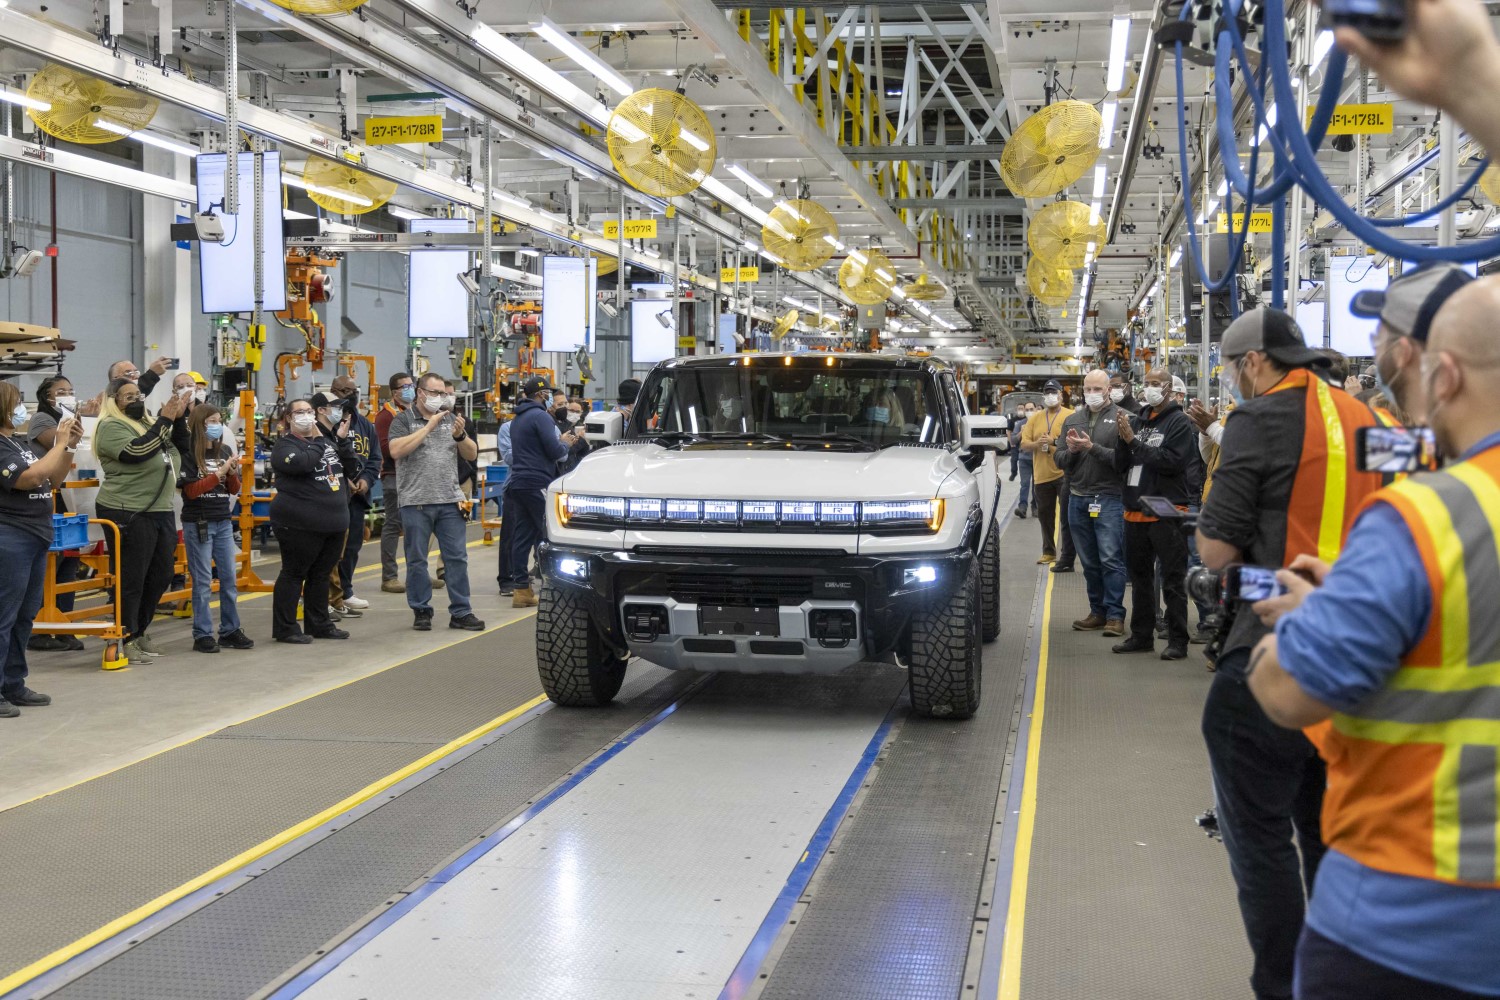 The first 2022 GMC HUMMER EV Pickup Edition 1 exits Factory ZERO in Detroit and Hamtramck, Michigan. VIN 001 was auctioned in March 2021 at the Barrett-Jackson Scottsdale auction for $2.5 million to benefit the Tunnel to Towers Foundation. (Photo by Jeffrey Sauger for General Motors)